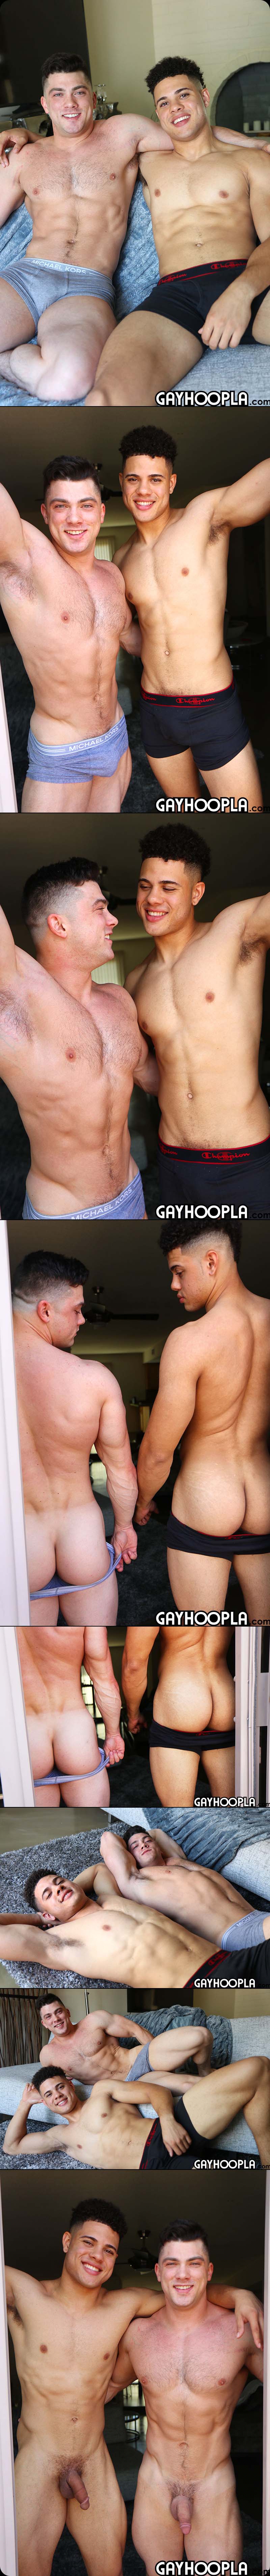 Channing Rodd's First Time [Featuring Collin Simpson] at GayHoopla